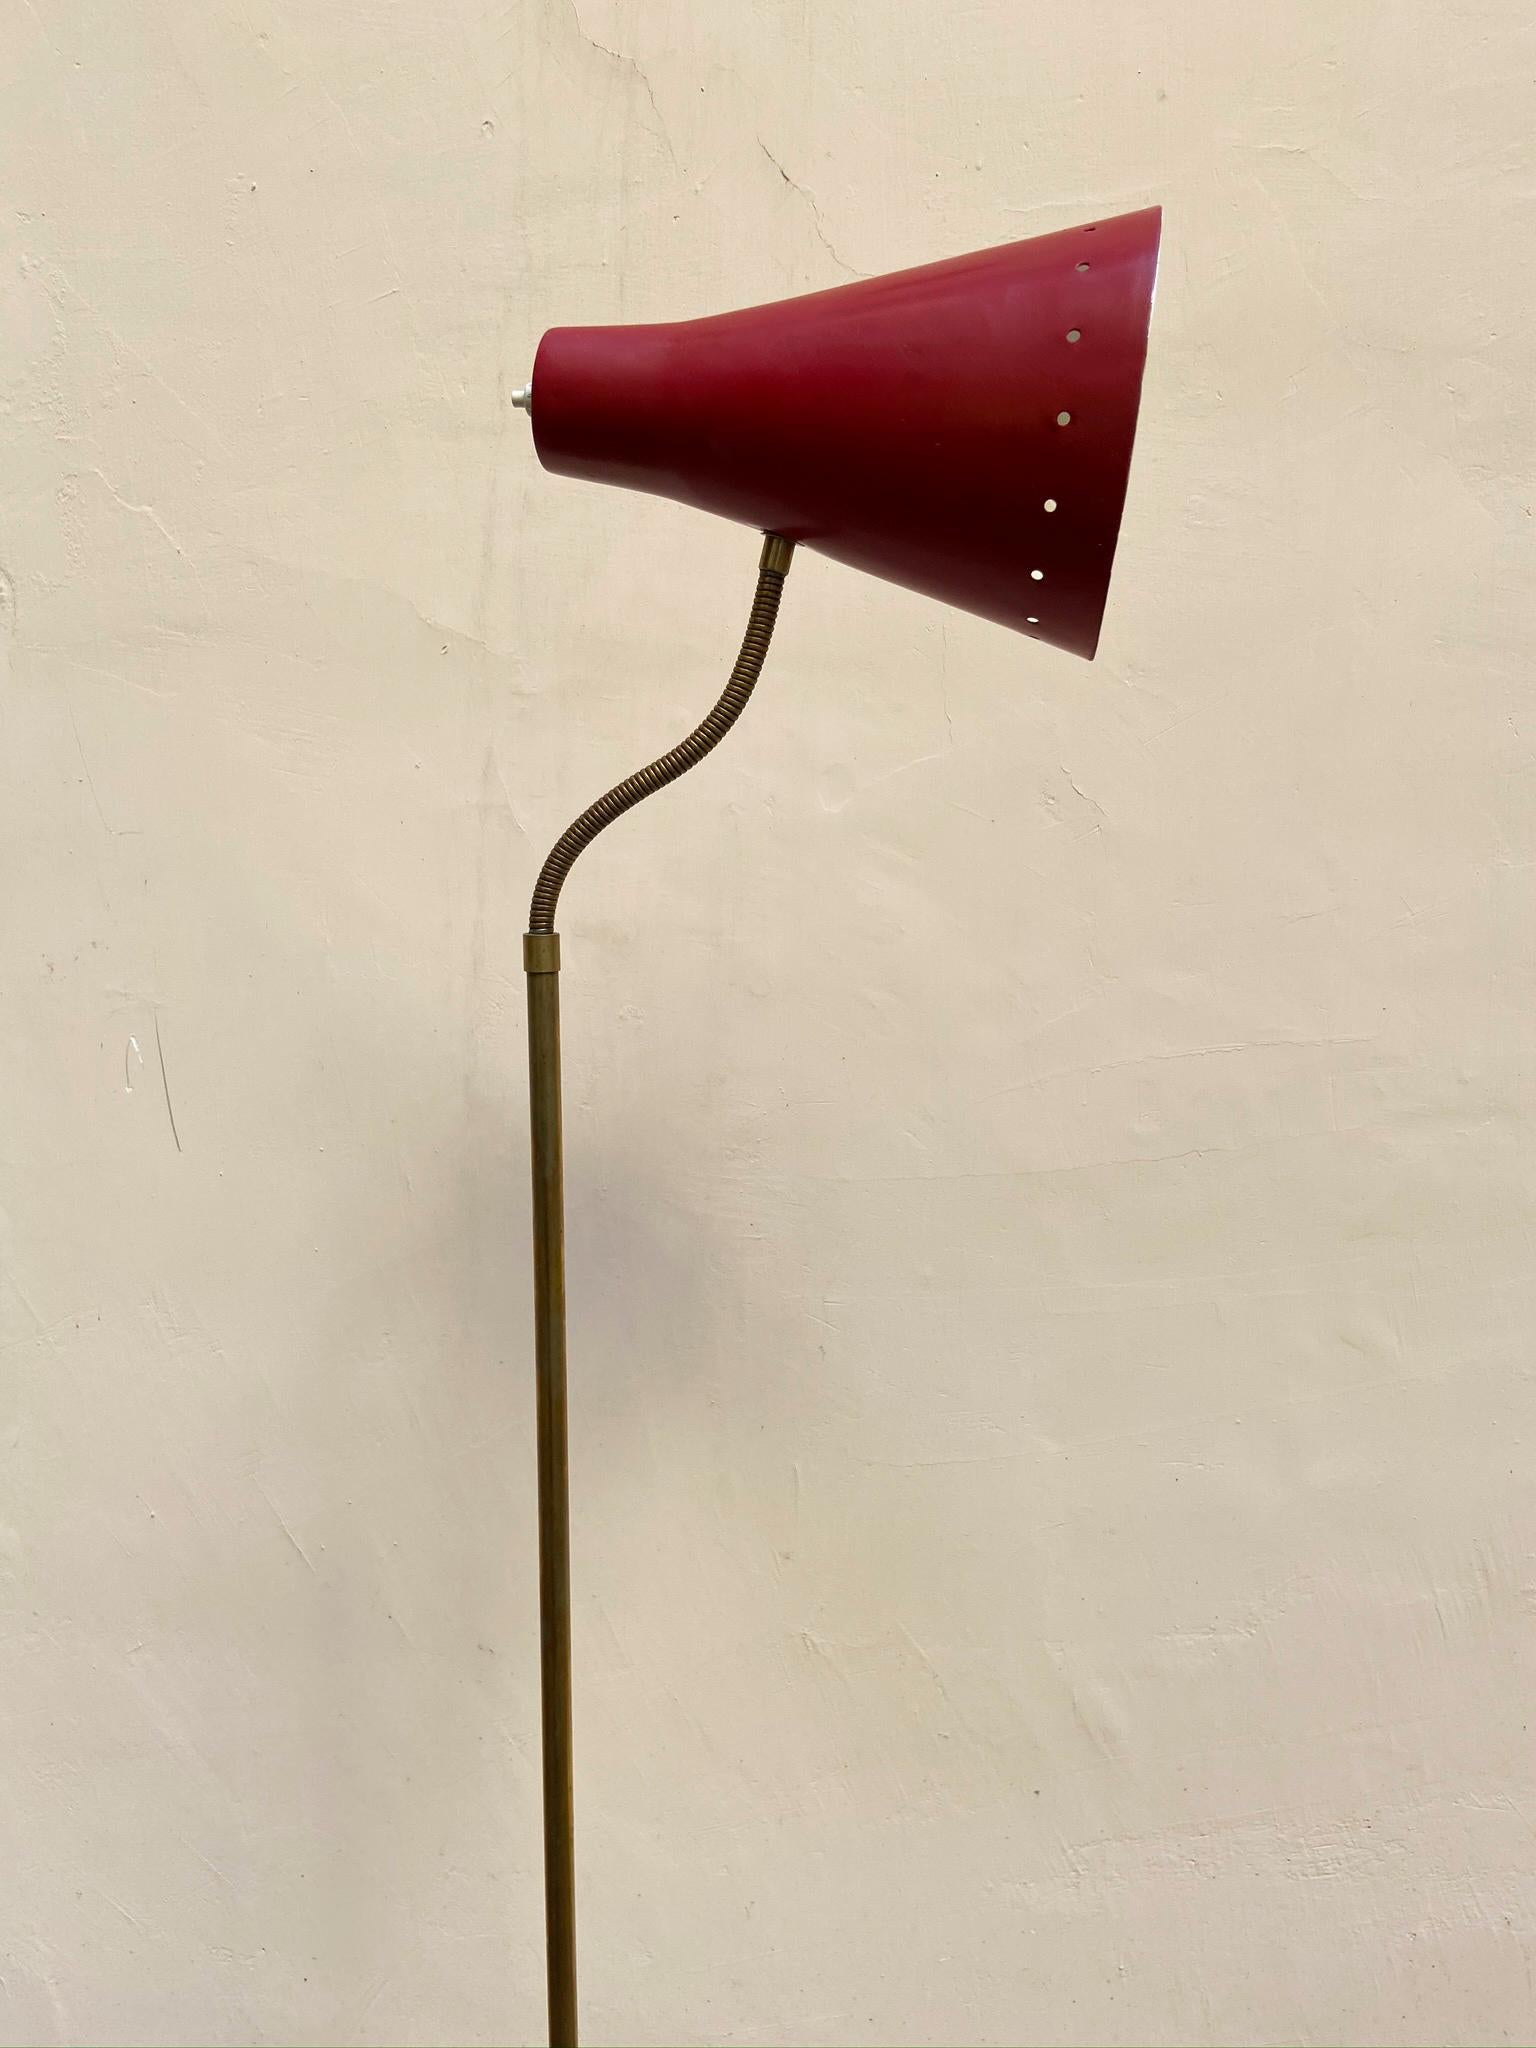 Italian manufactured floor lamp produced in the 1950s.
Circular base in brass.
Brass stem with articulated end part.
Diffuser in red painted aluminum externally.